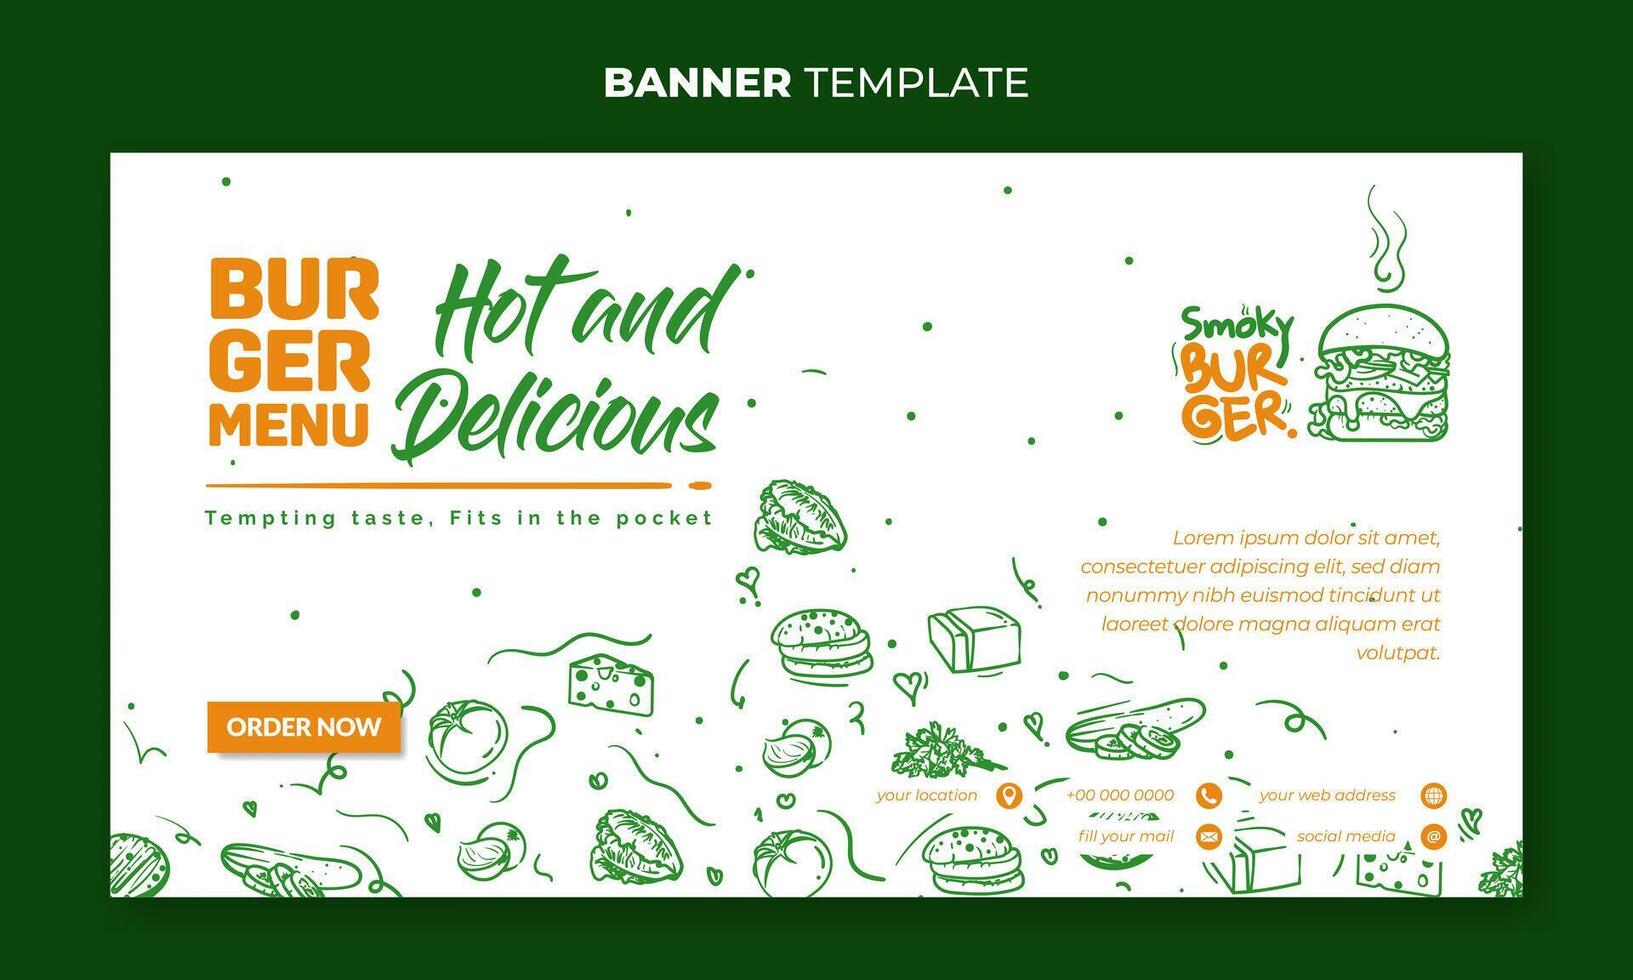 Banner template design in white background with hand drawn of ingredients for making burgers. Template design for street food advertisement vector